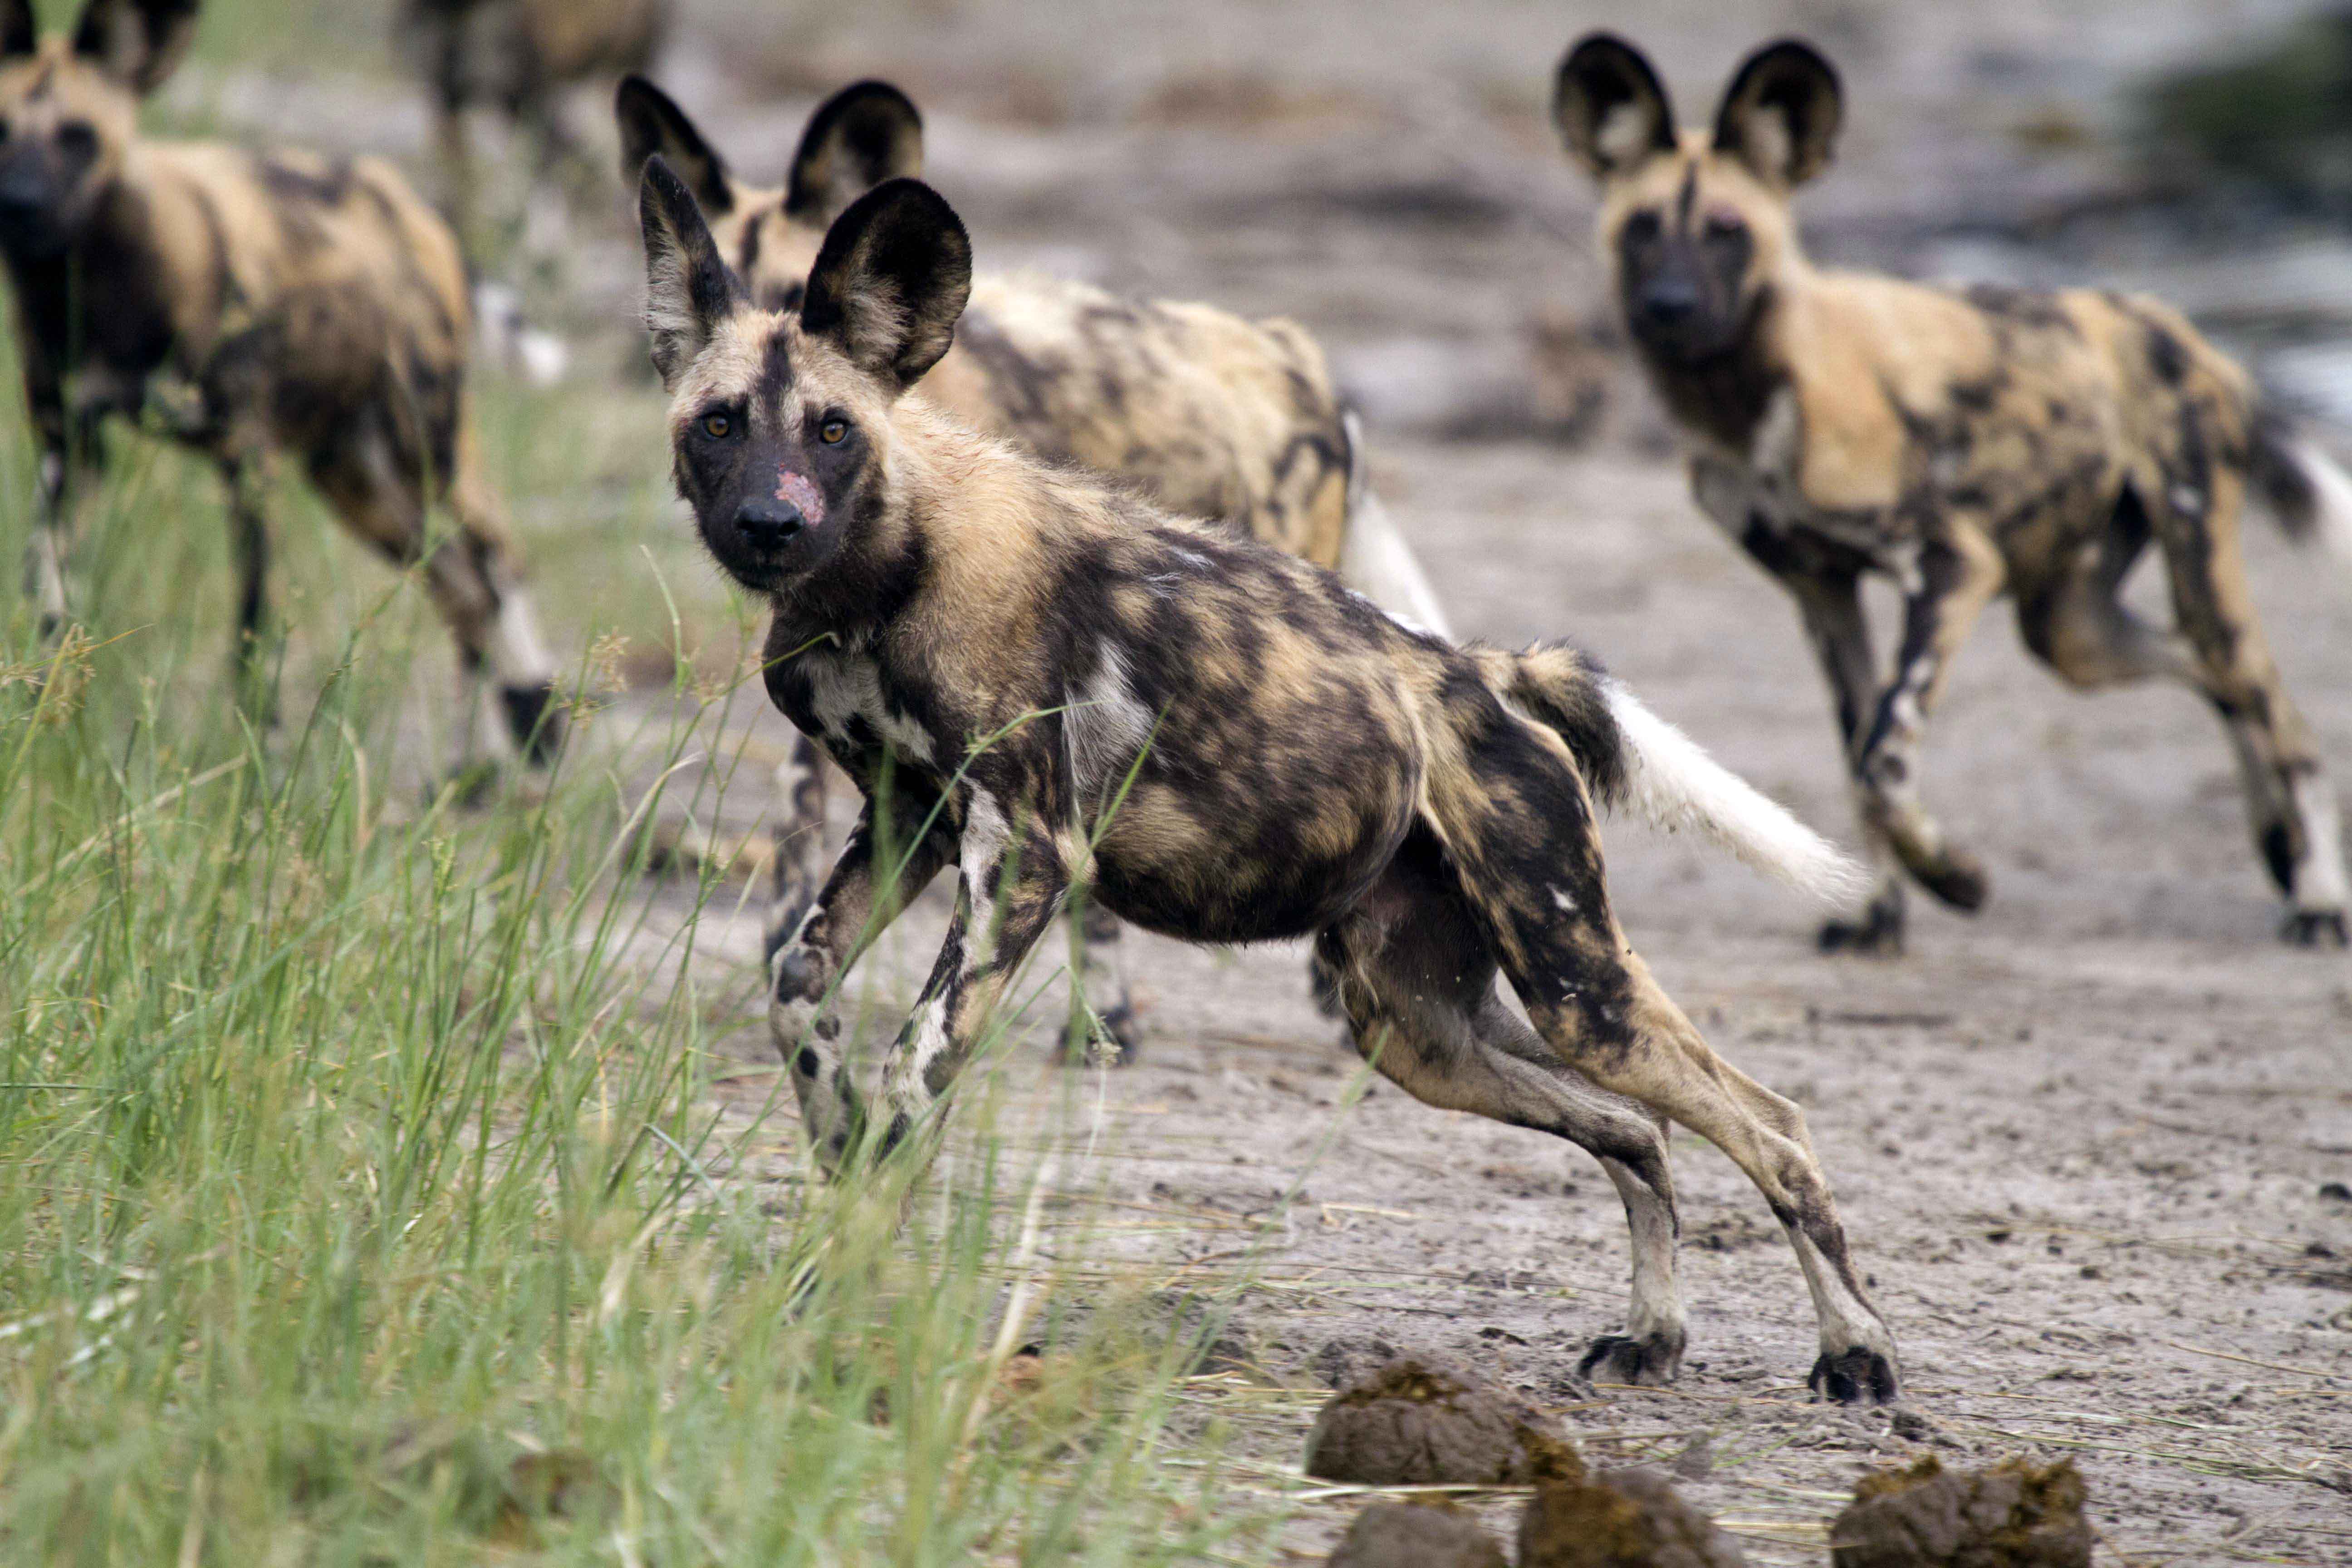 How Pet Dogs Are Helping Out Their Endangered Kin in the Wild